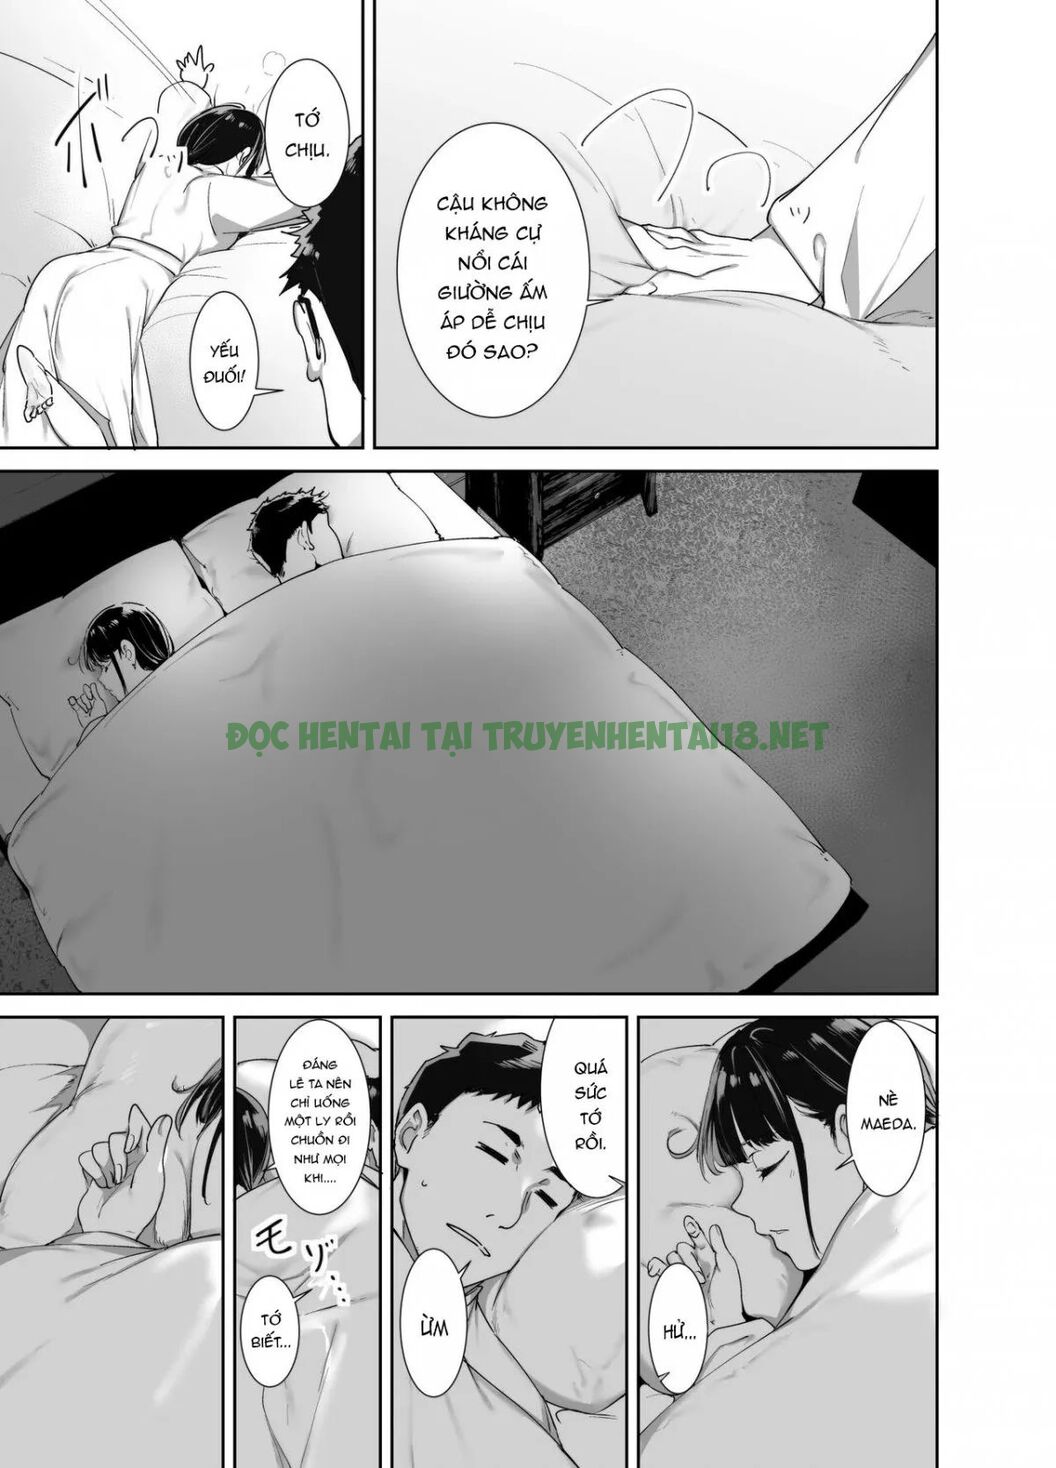 Xem ảnh Sex With Your Otaku Friend Is Mindblowing - Chapter 2 END - 8 - Hentai24h.Tv